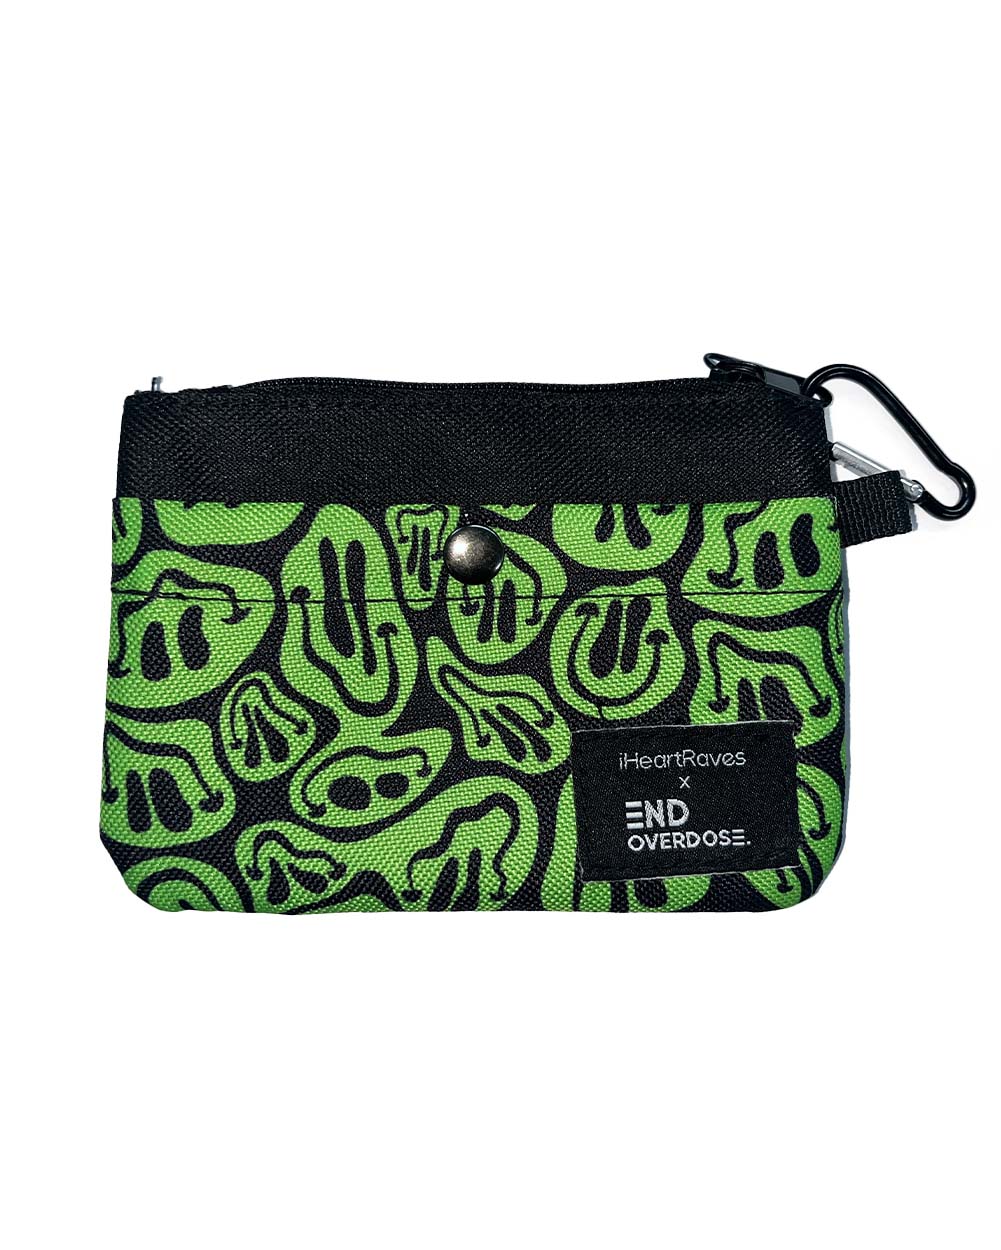 End Overdose x iHeartRaves Narcan Pouch Holder-Black/Neon Green-Front